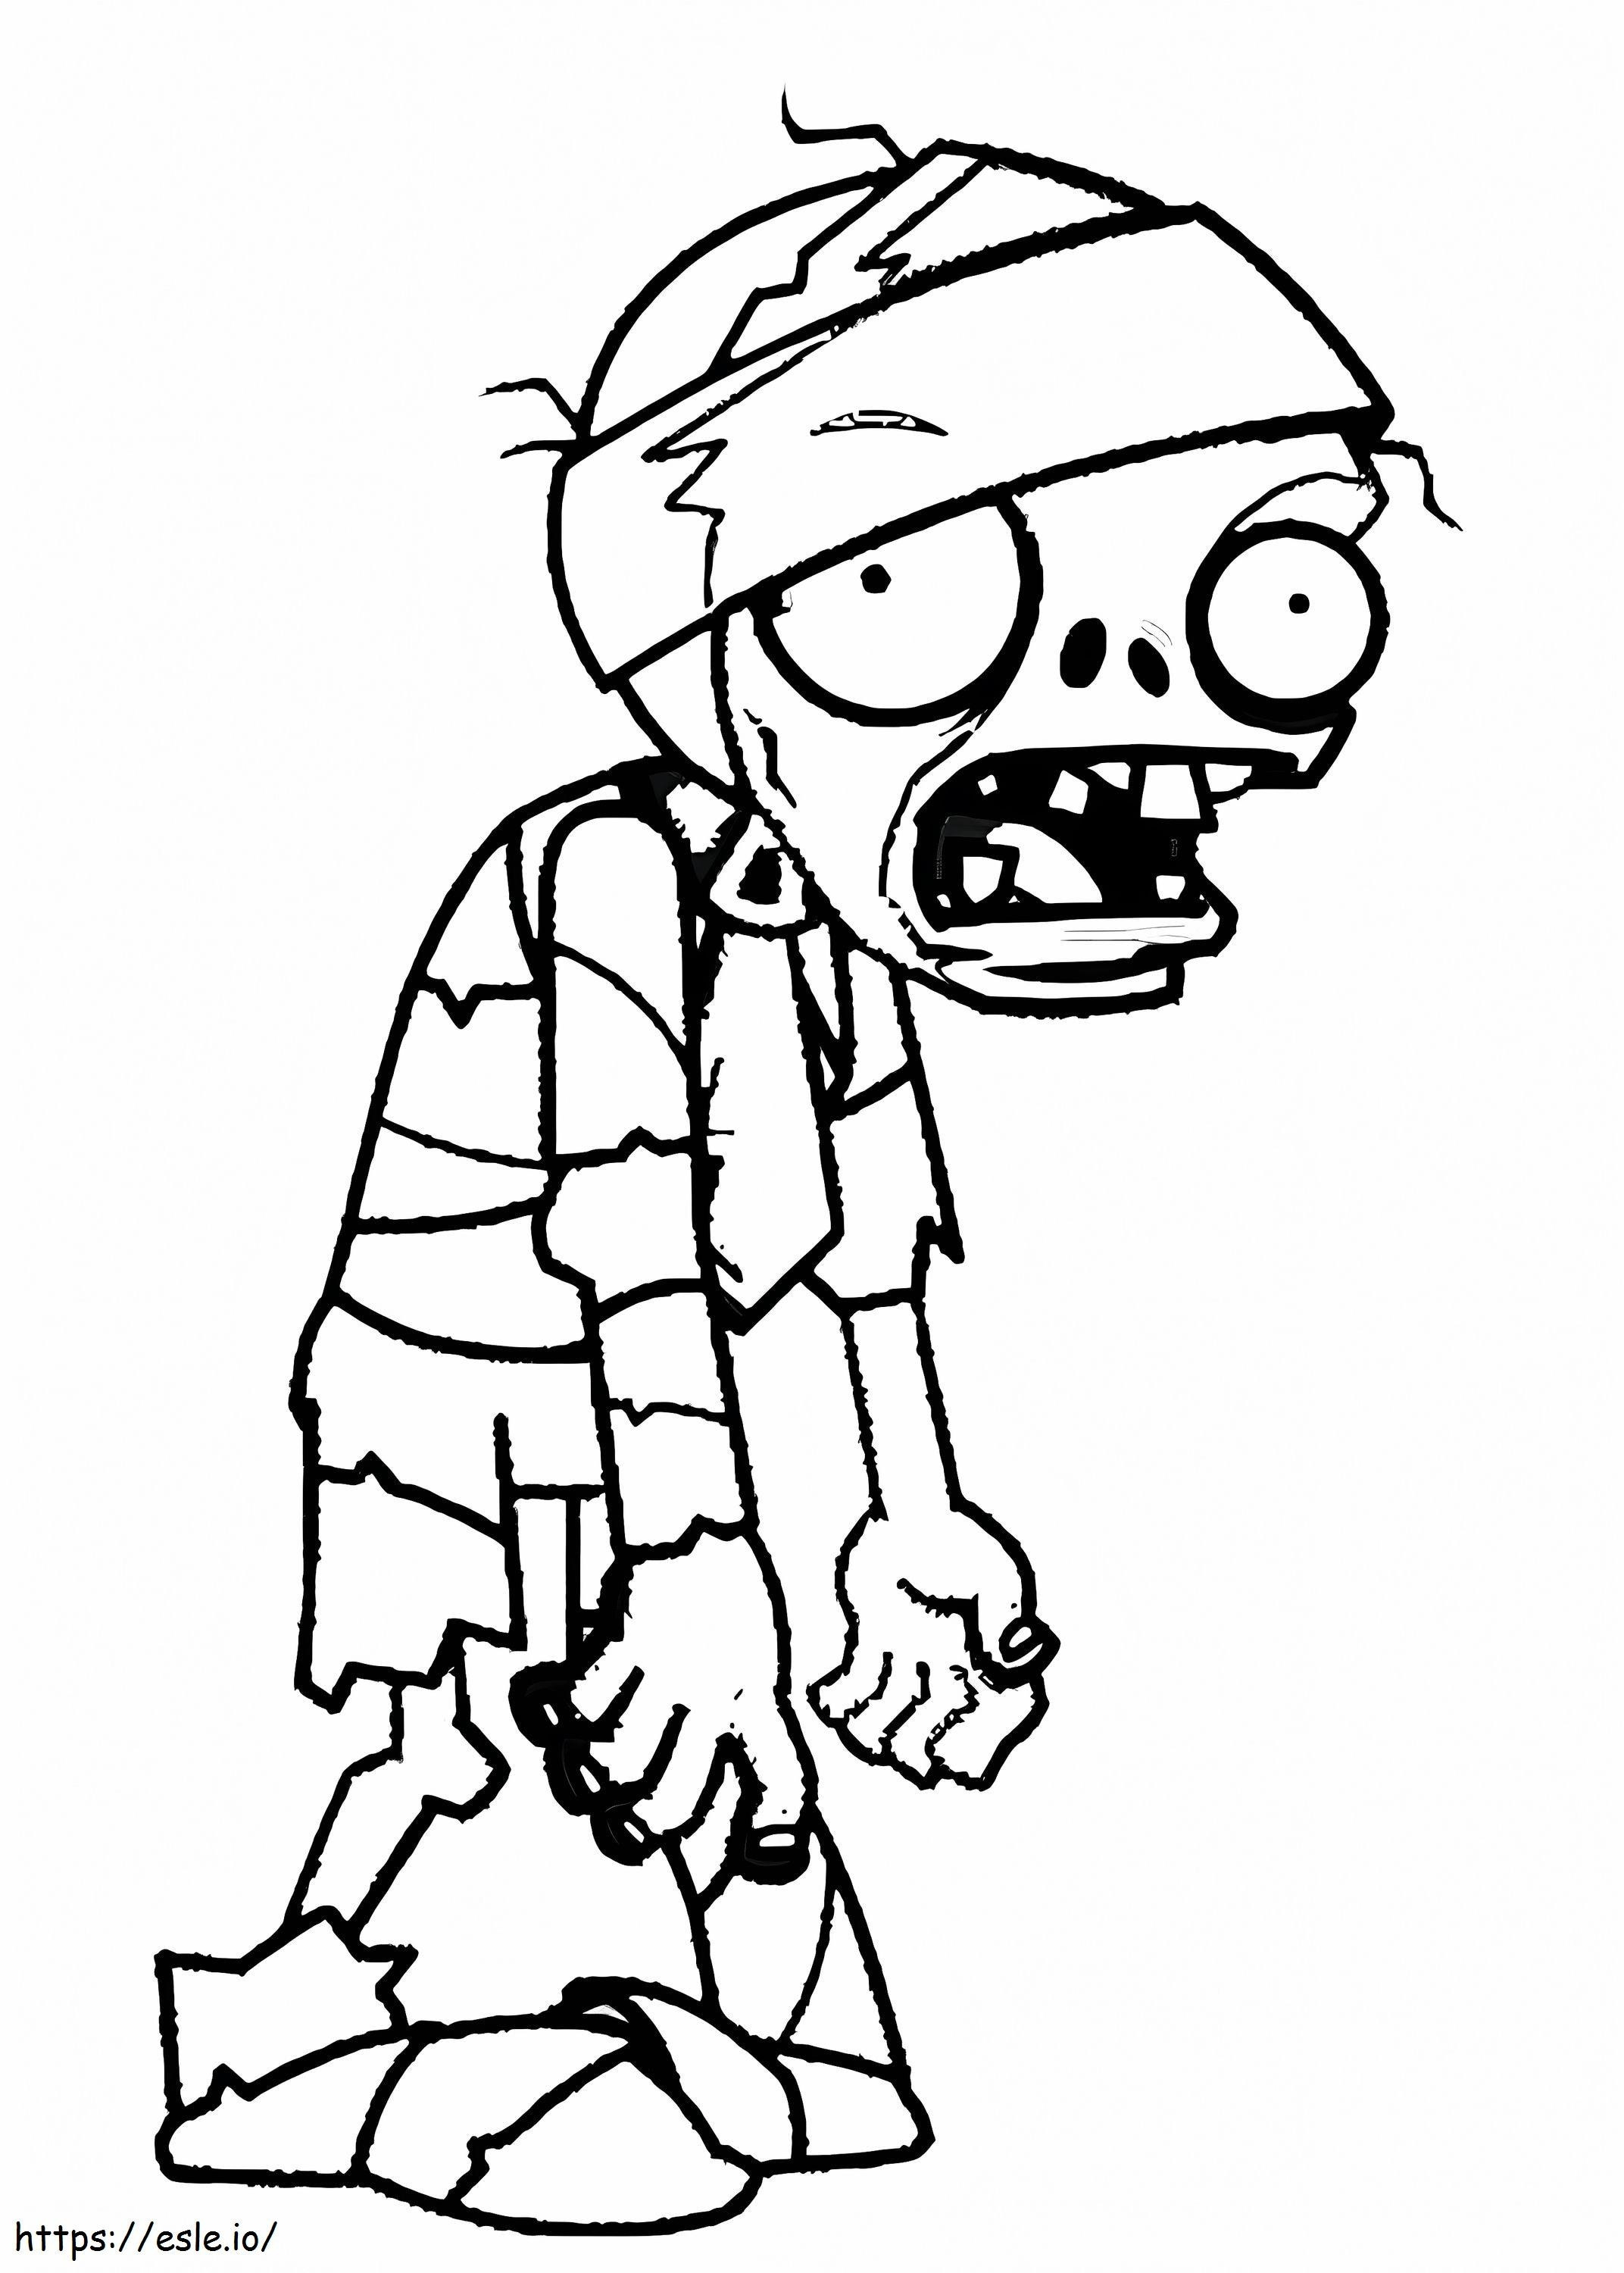 Zombie Mummy From Plants Vs Zombies coloring page